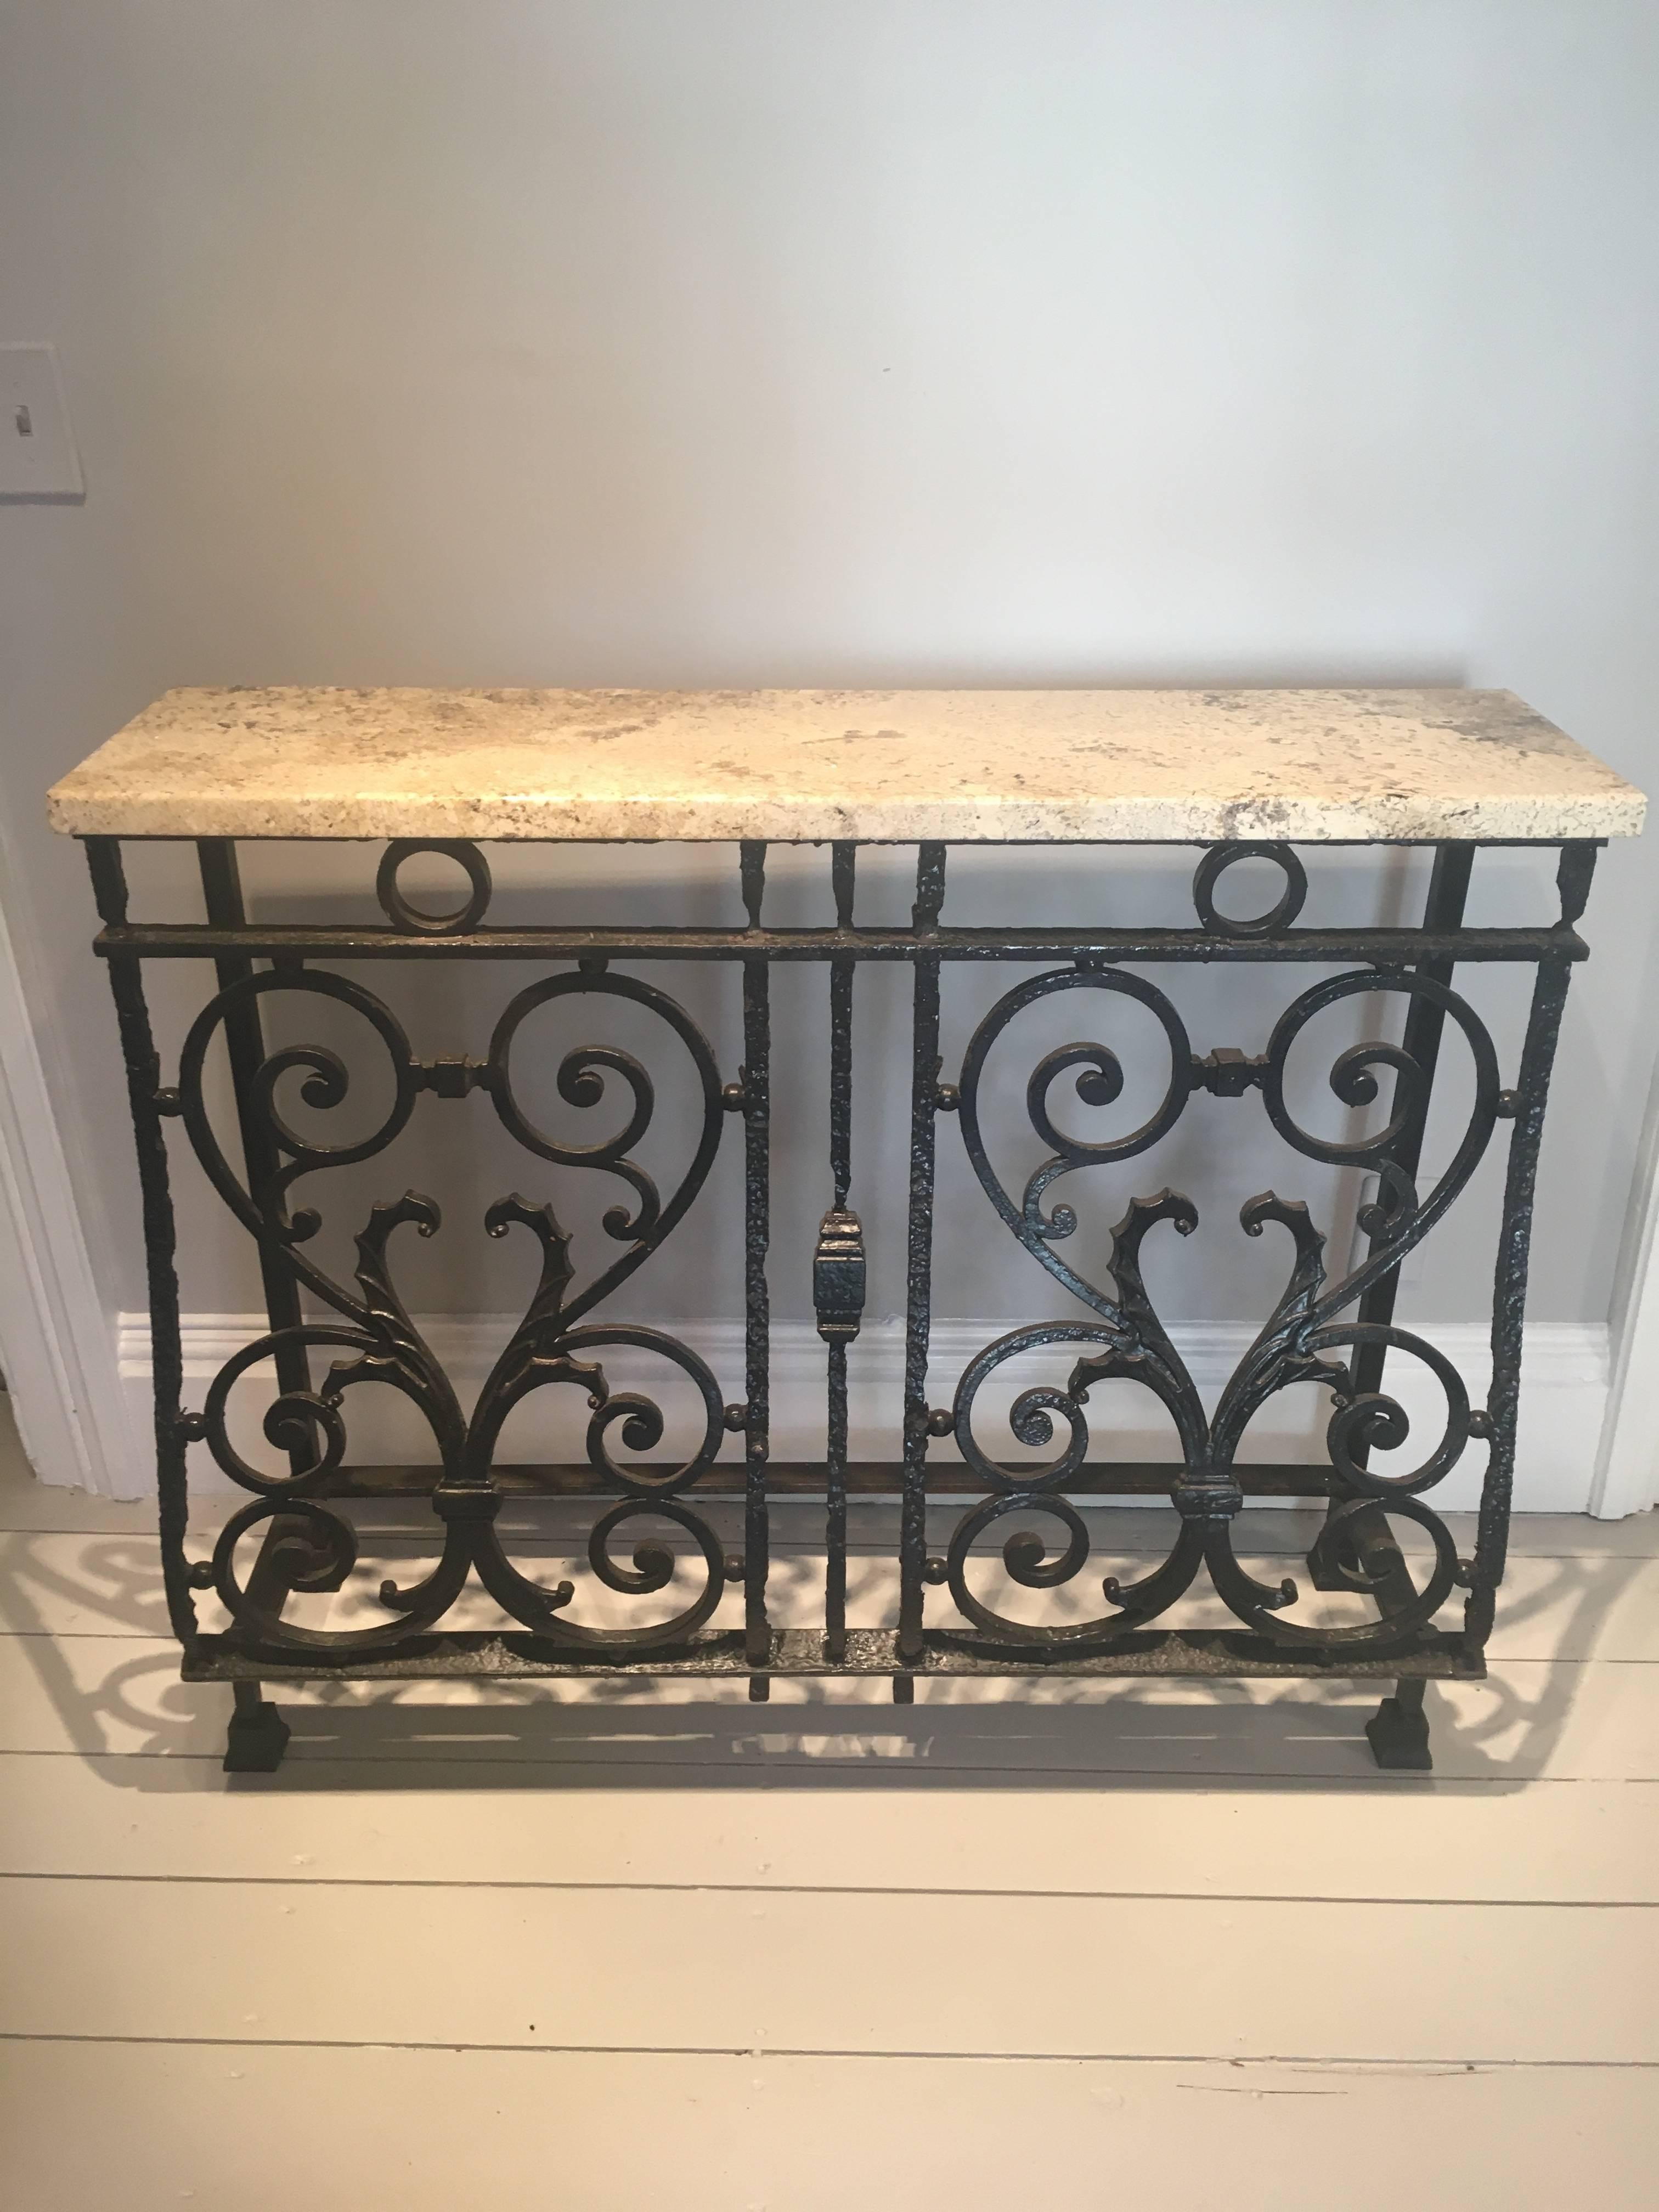 An unusual form and sensuous lines define this wonderfully-proportioned cast iron console table. Recently-fabricated from an antique balcony railing (from the Queen's Horse Guards' residence) and topped with a 1" thick speckled granite top